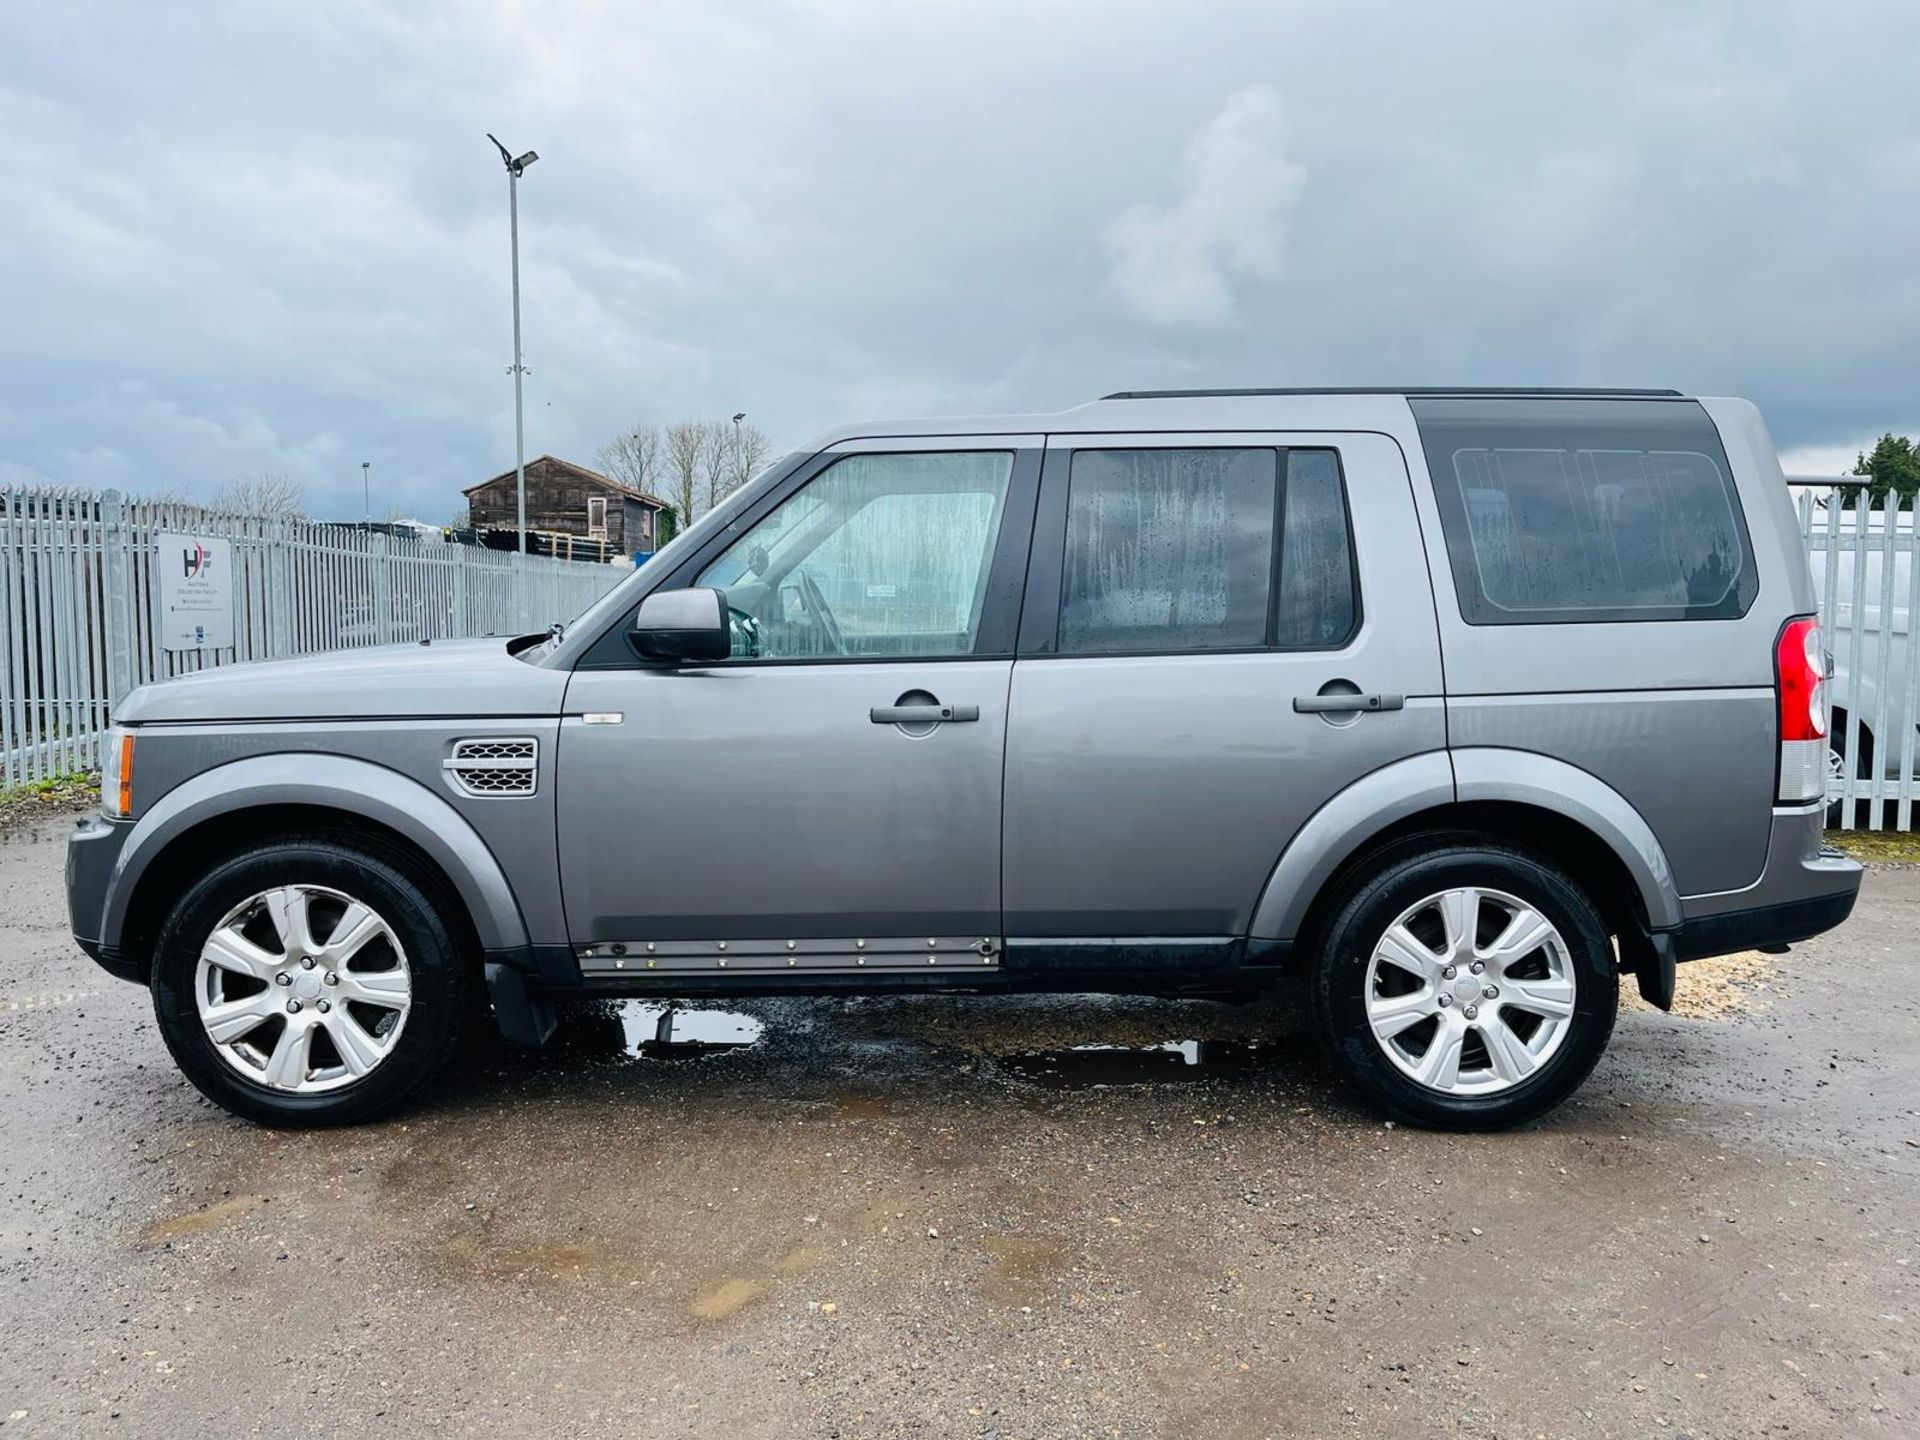 ** ON SALE ** Land Rover Discovery 4 3.0 TDV6 HSE 4WD 2009 '59 Reg' Full Spec - No Vat - 7 Seats - Image 4 of 39